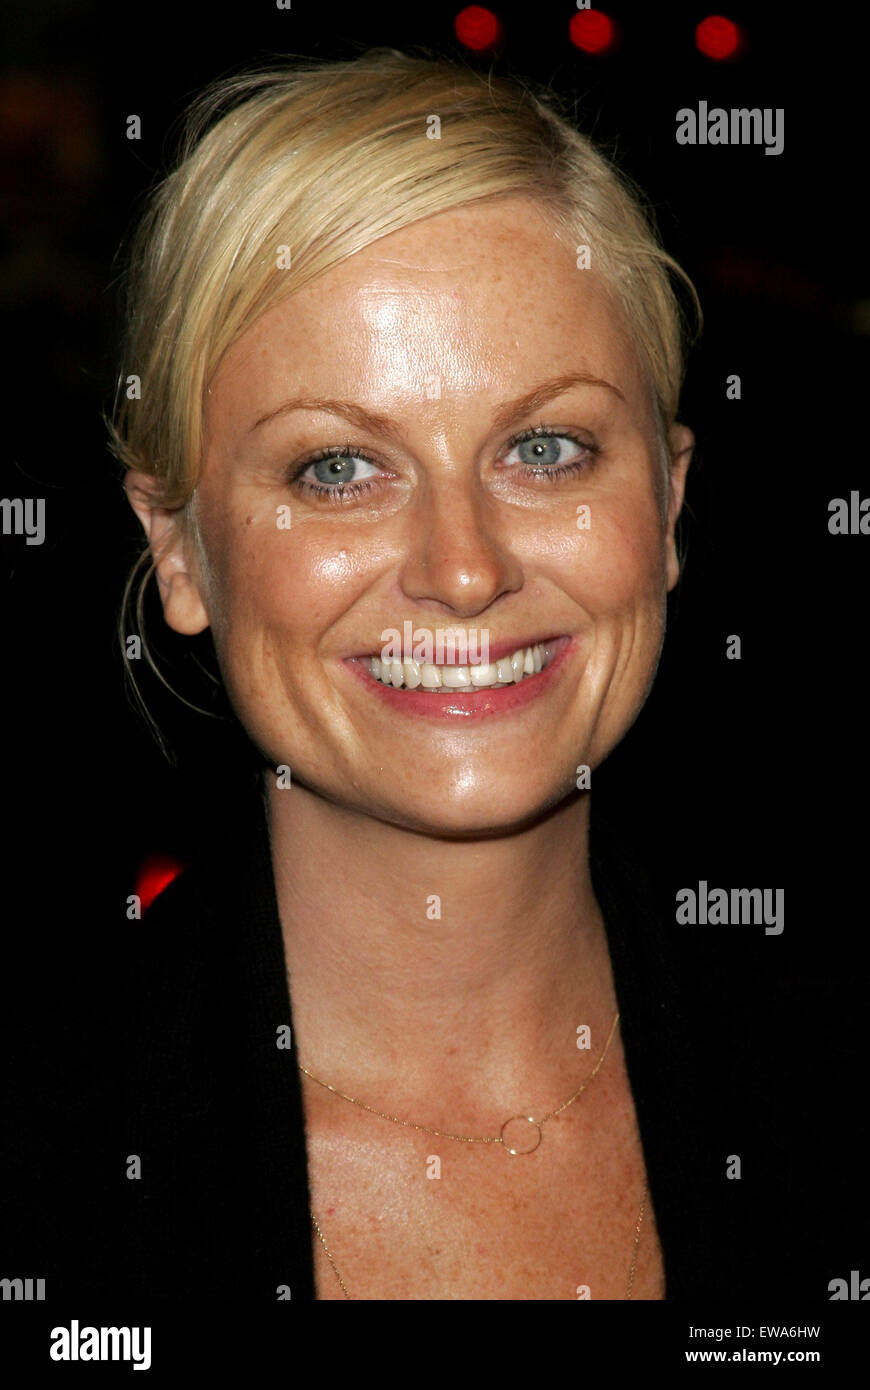 Amy Poehler attends the Premiere of 'Snakes on a Plane' held at the Grauman's Chinese Theater in Hollywood. Stock Photo